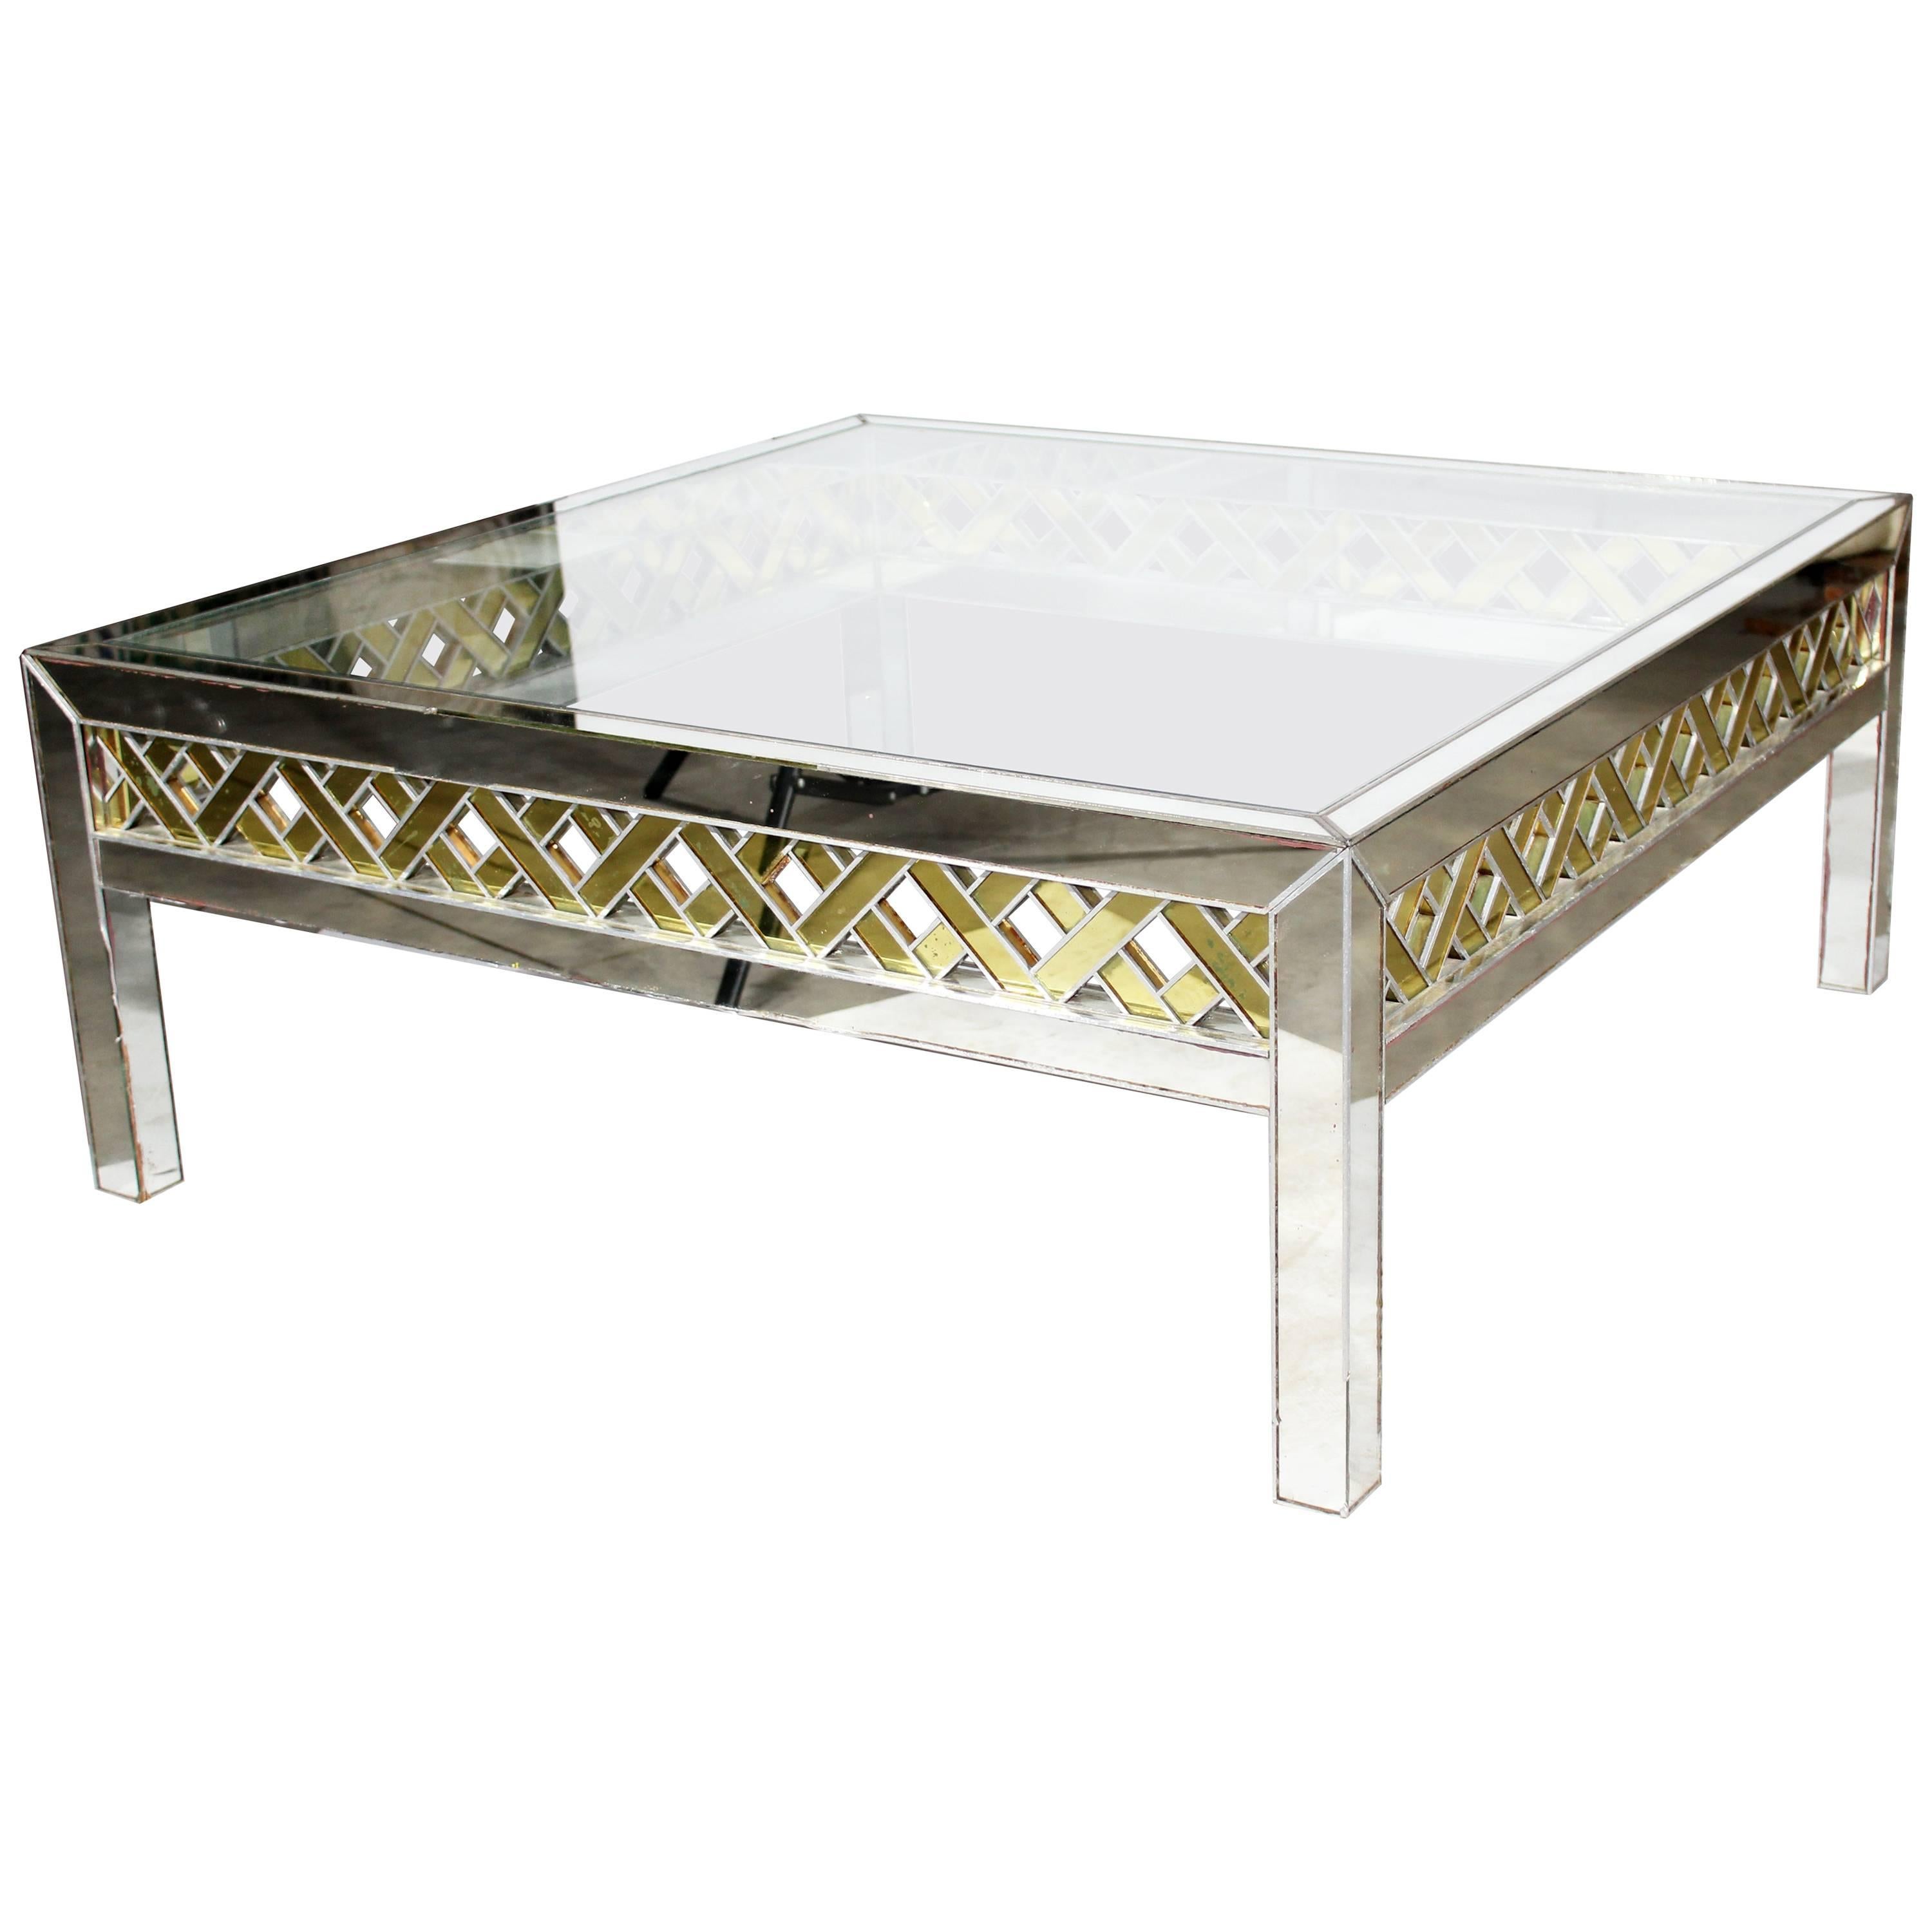 Italian Centre Table Made in Crystal Two Colors of the 1980s